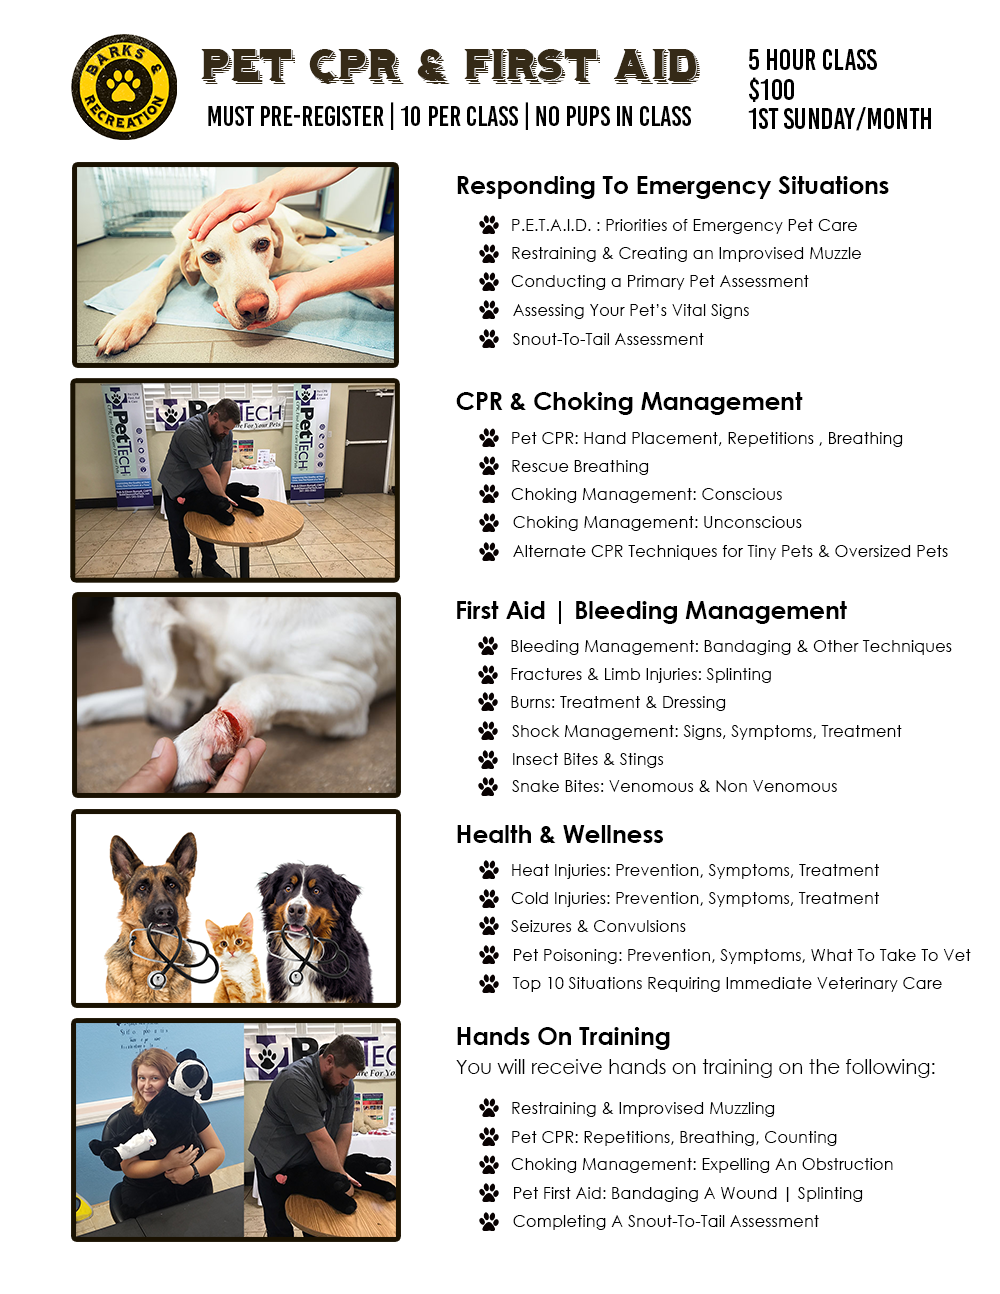 Pet CPR and First Aid Class Agenda Barks and Recreation